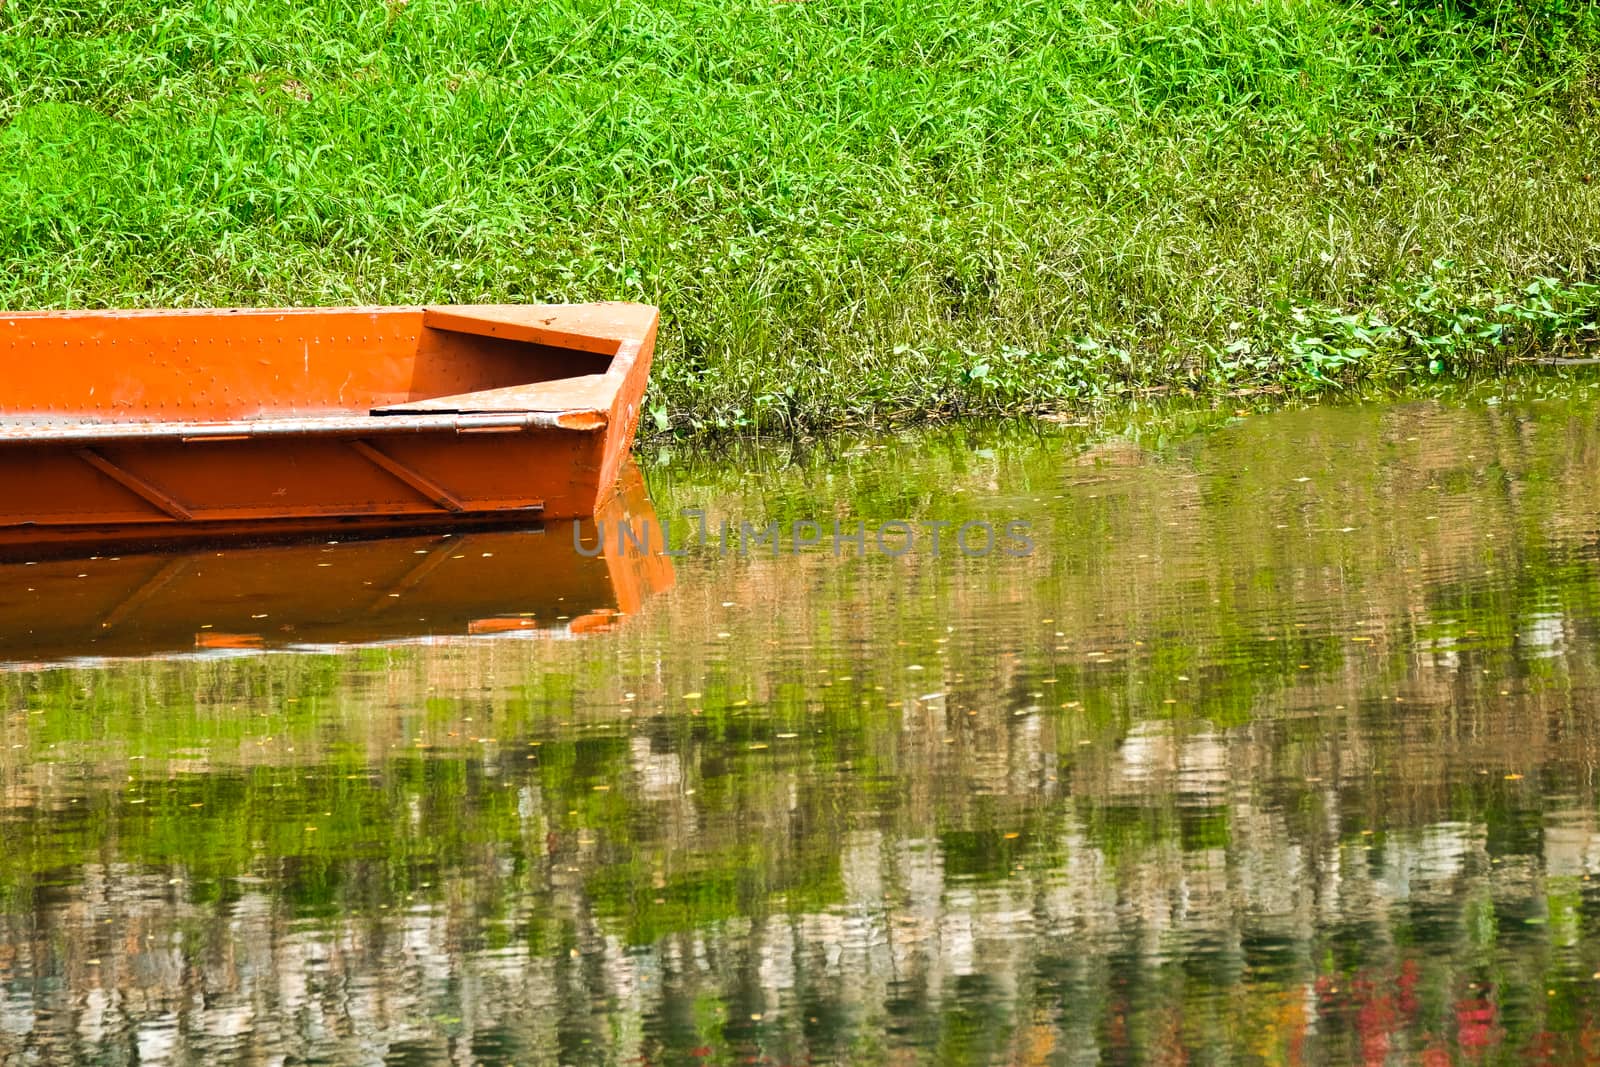 an abandonned rusty orange flat bottom boat resting by the bank of a shallow river